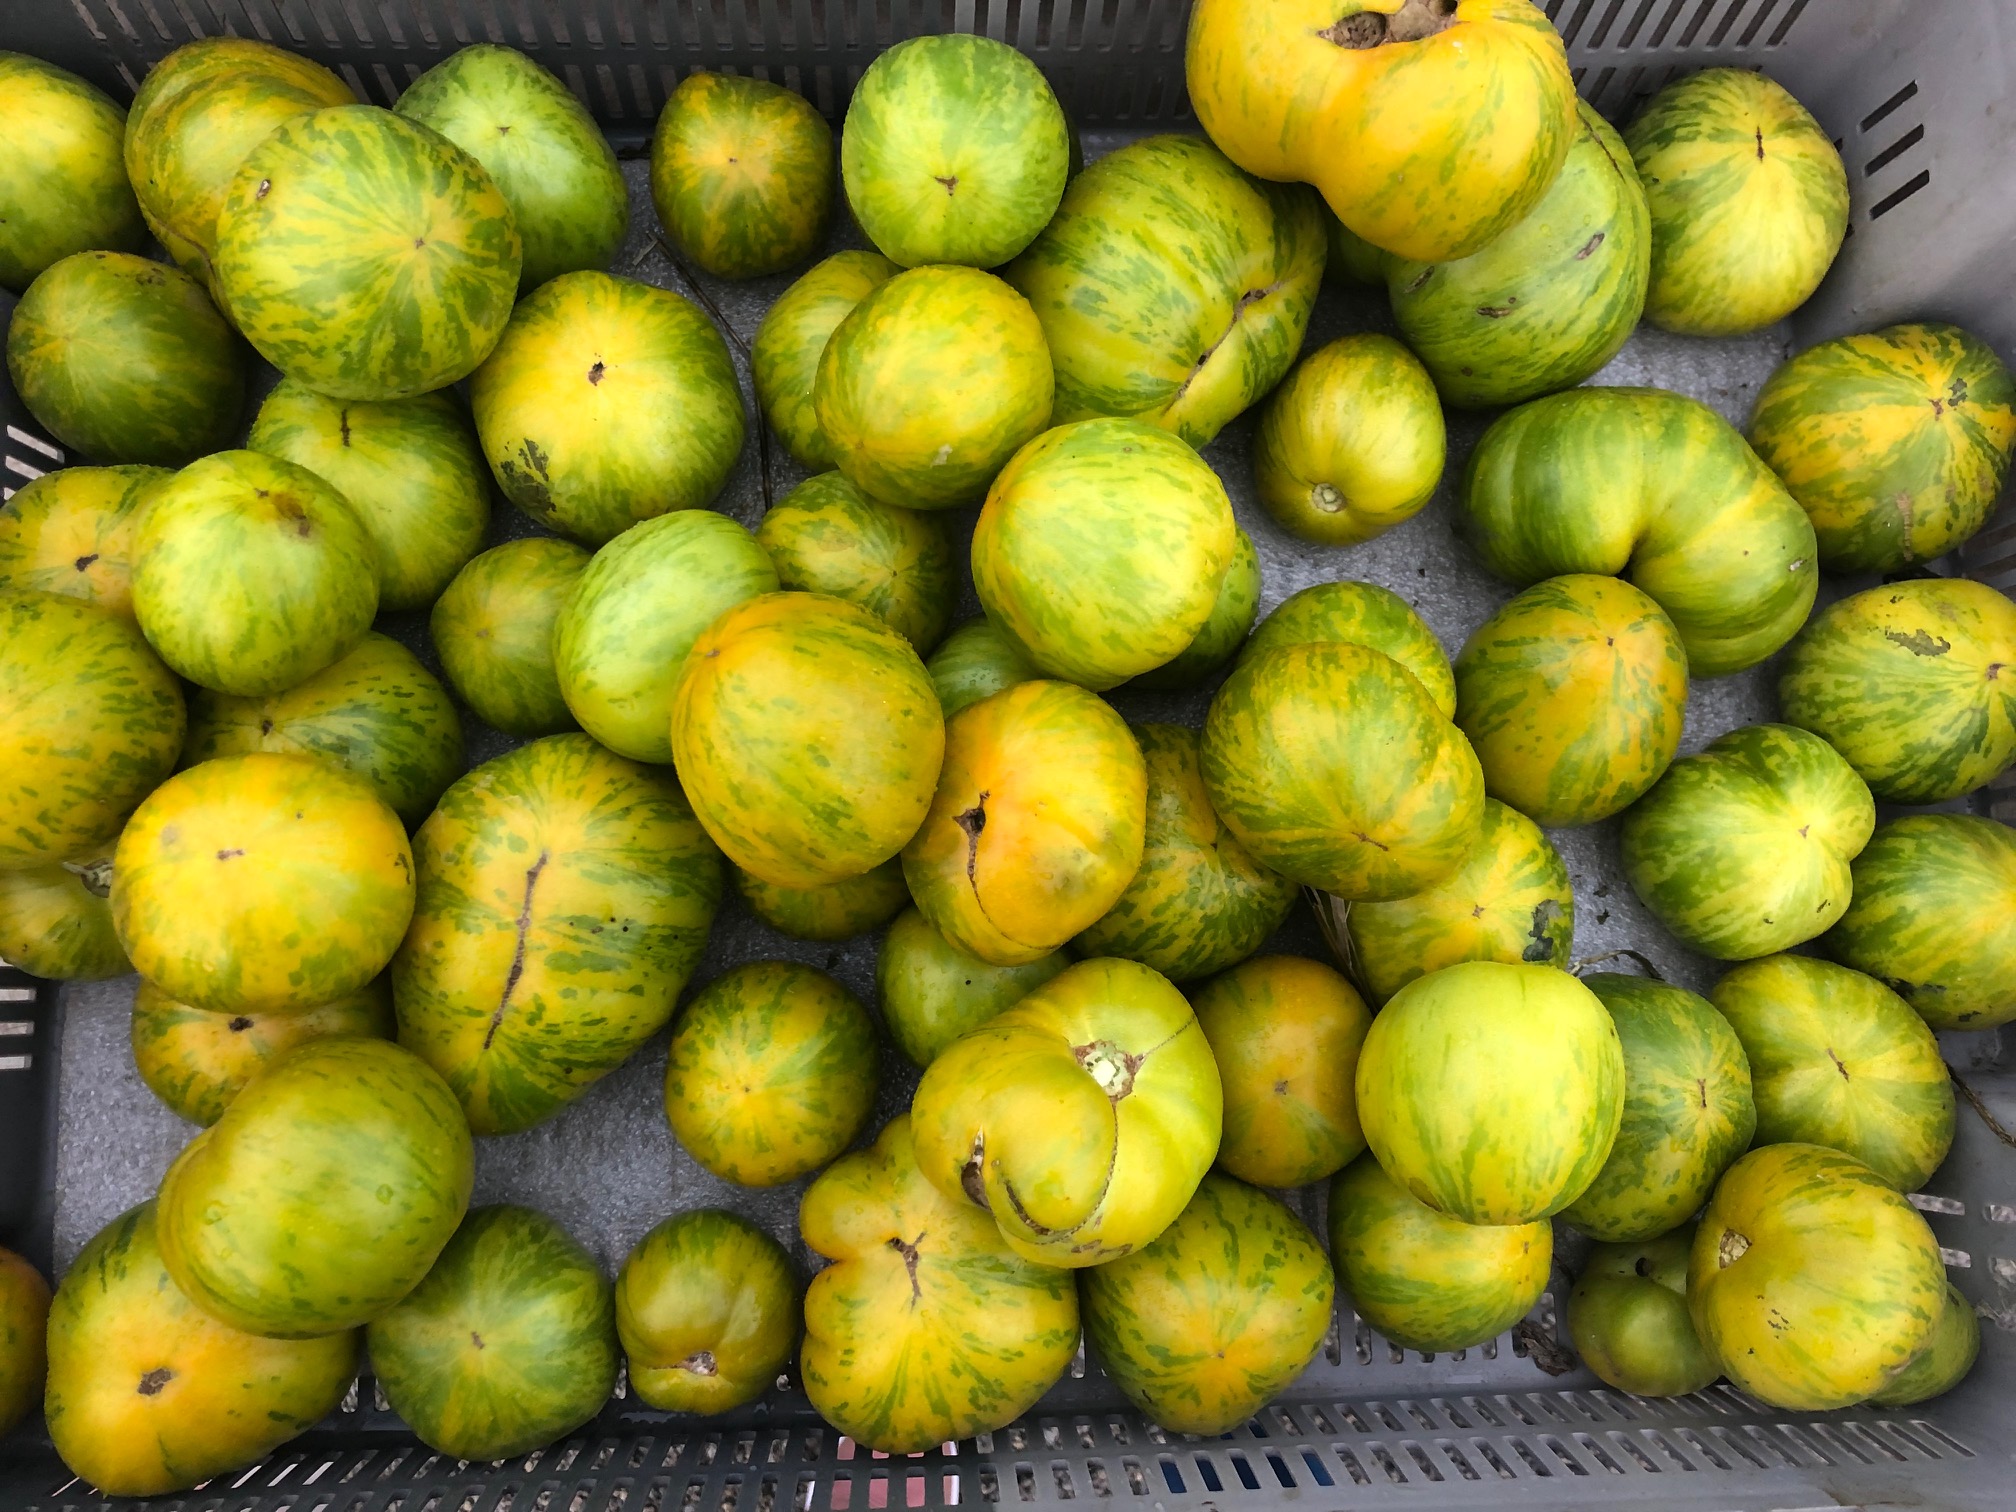 In a gray basket, there are many light green streaked tomatoes. Photo by Alyssa Buckley.